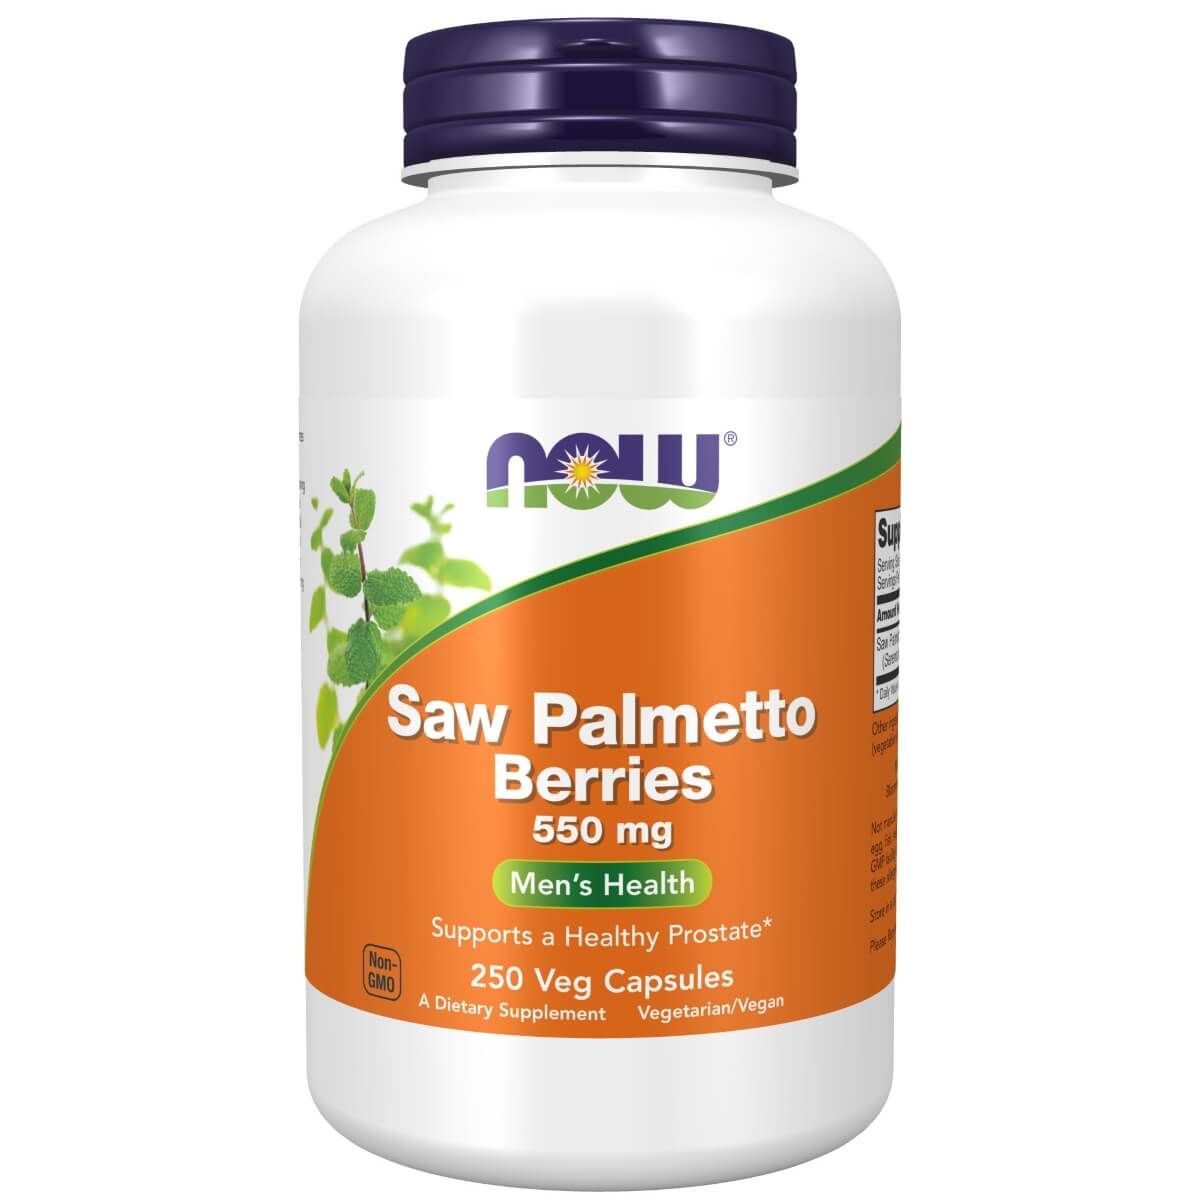 Photos - Vitamins & Minerals Now Foods Saw Palmetto Berries 550 mg 250 Veg Capsules PBW-P27915 